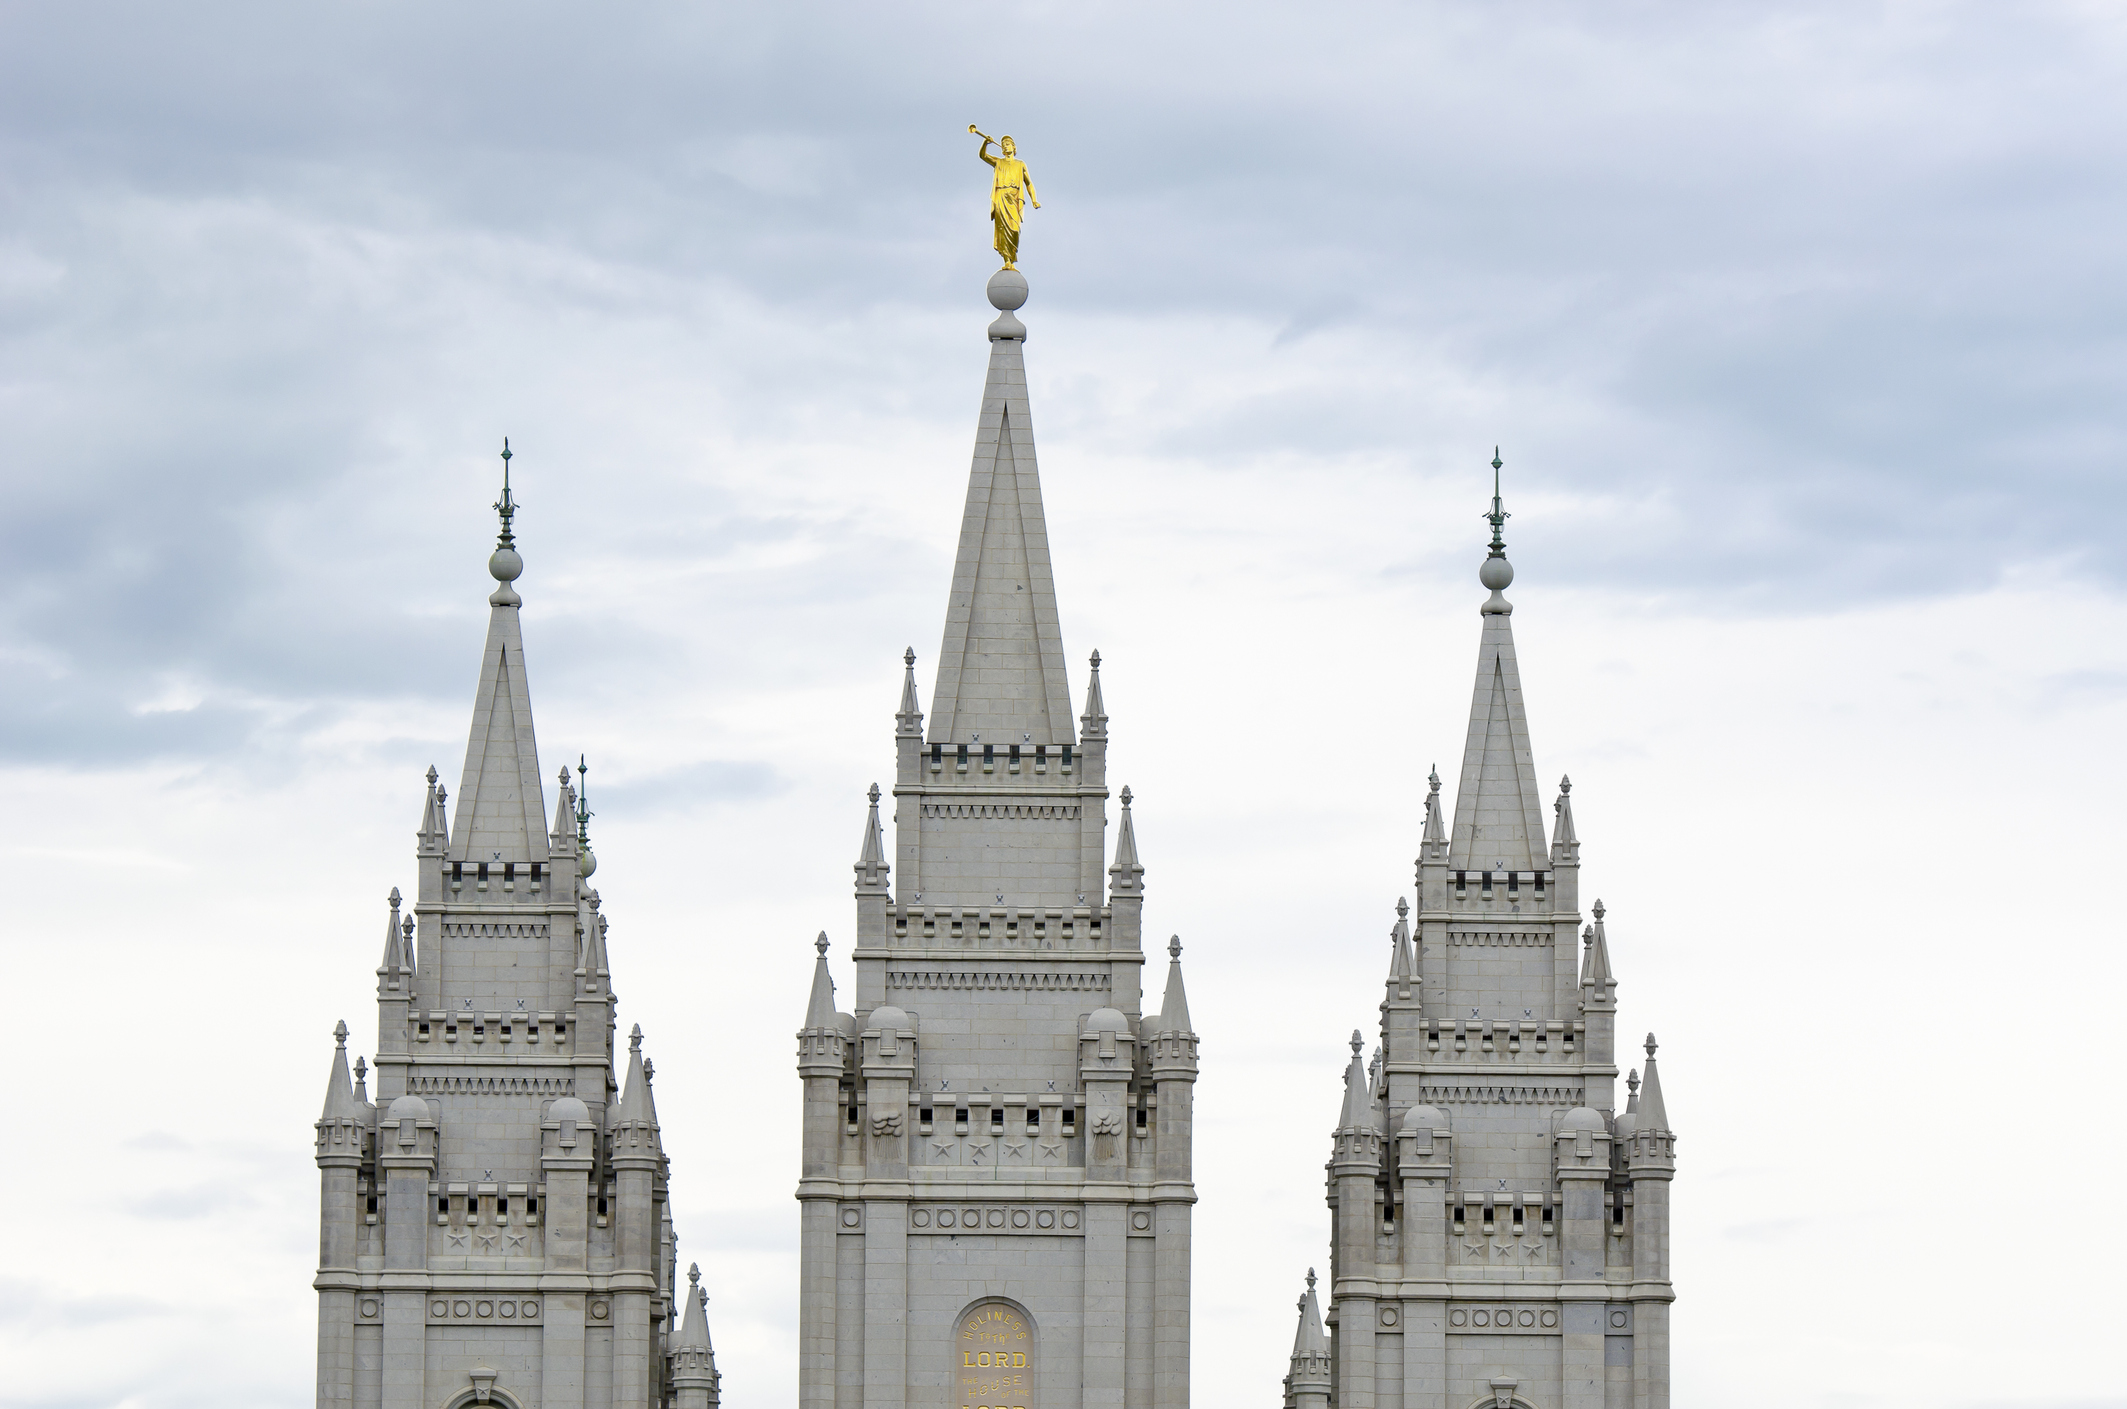 Church of the Latter-day Saints temple in Salt Lake City (Getty Images&mdash;meshaphoto)